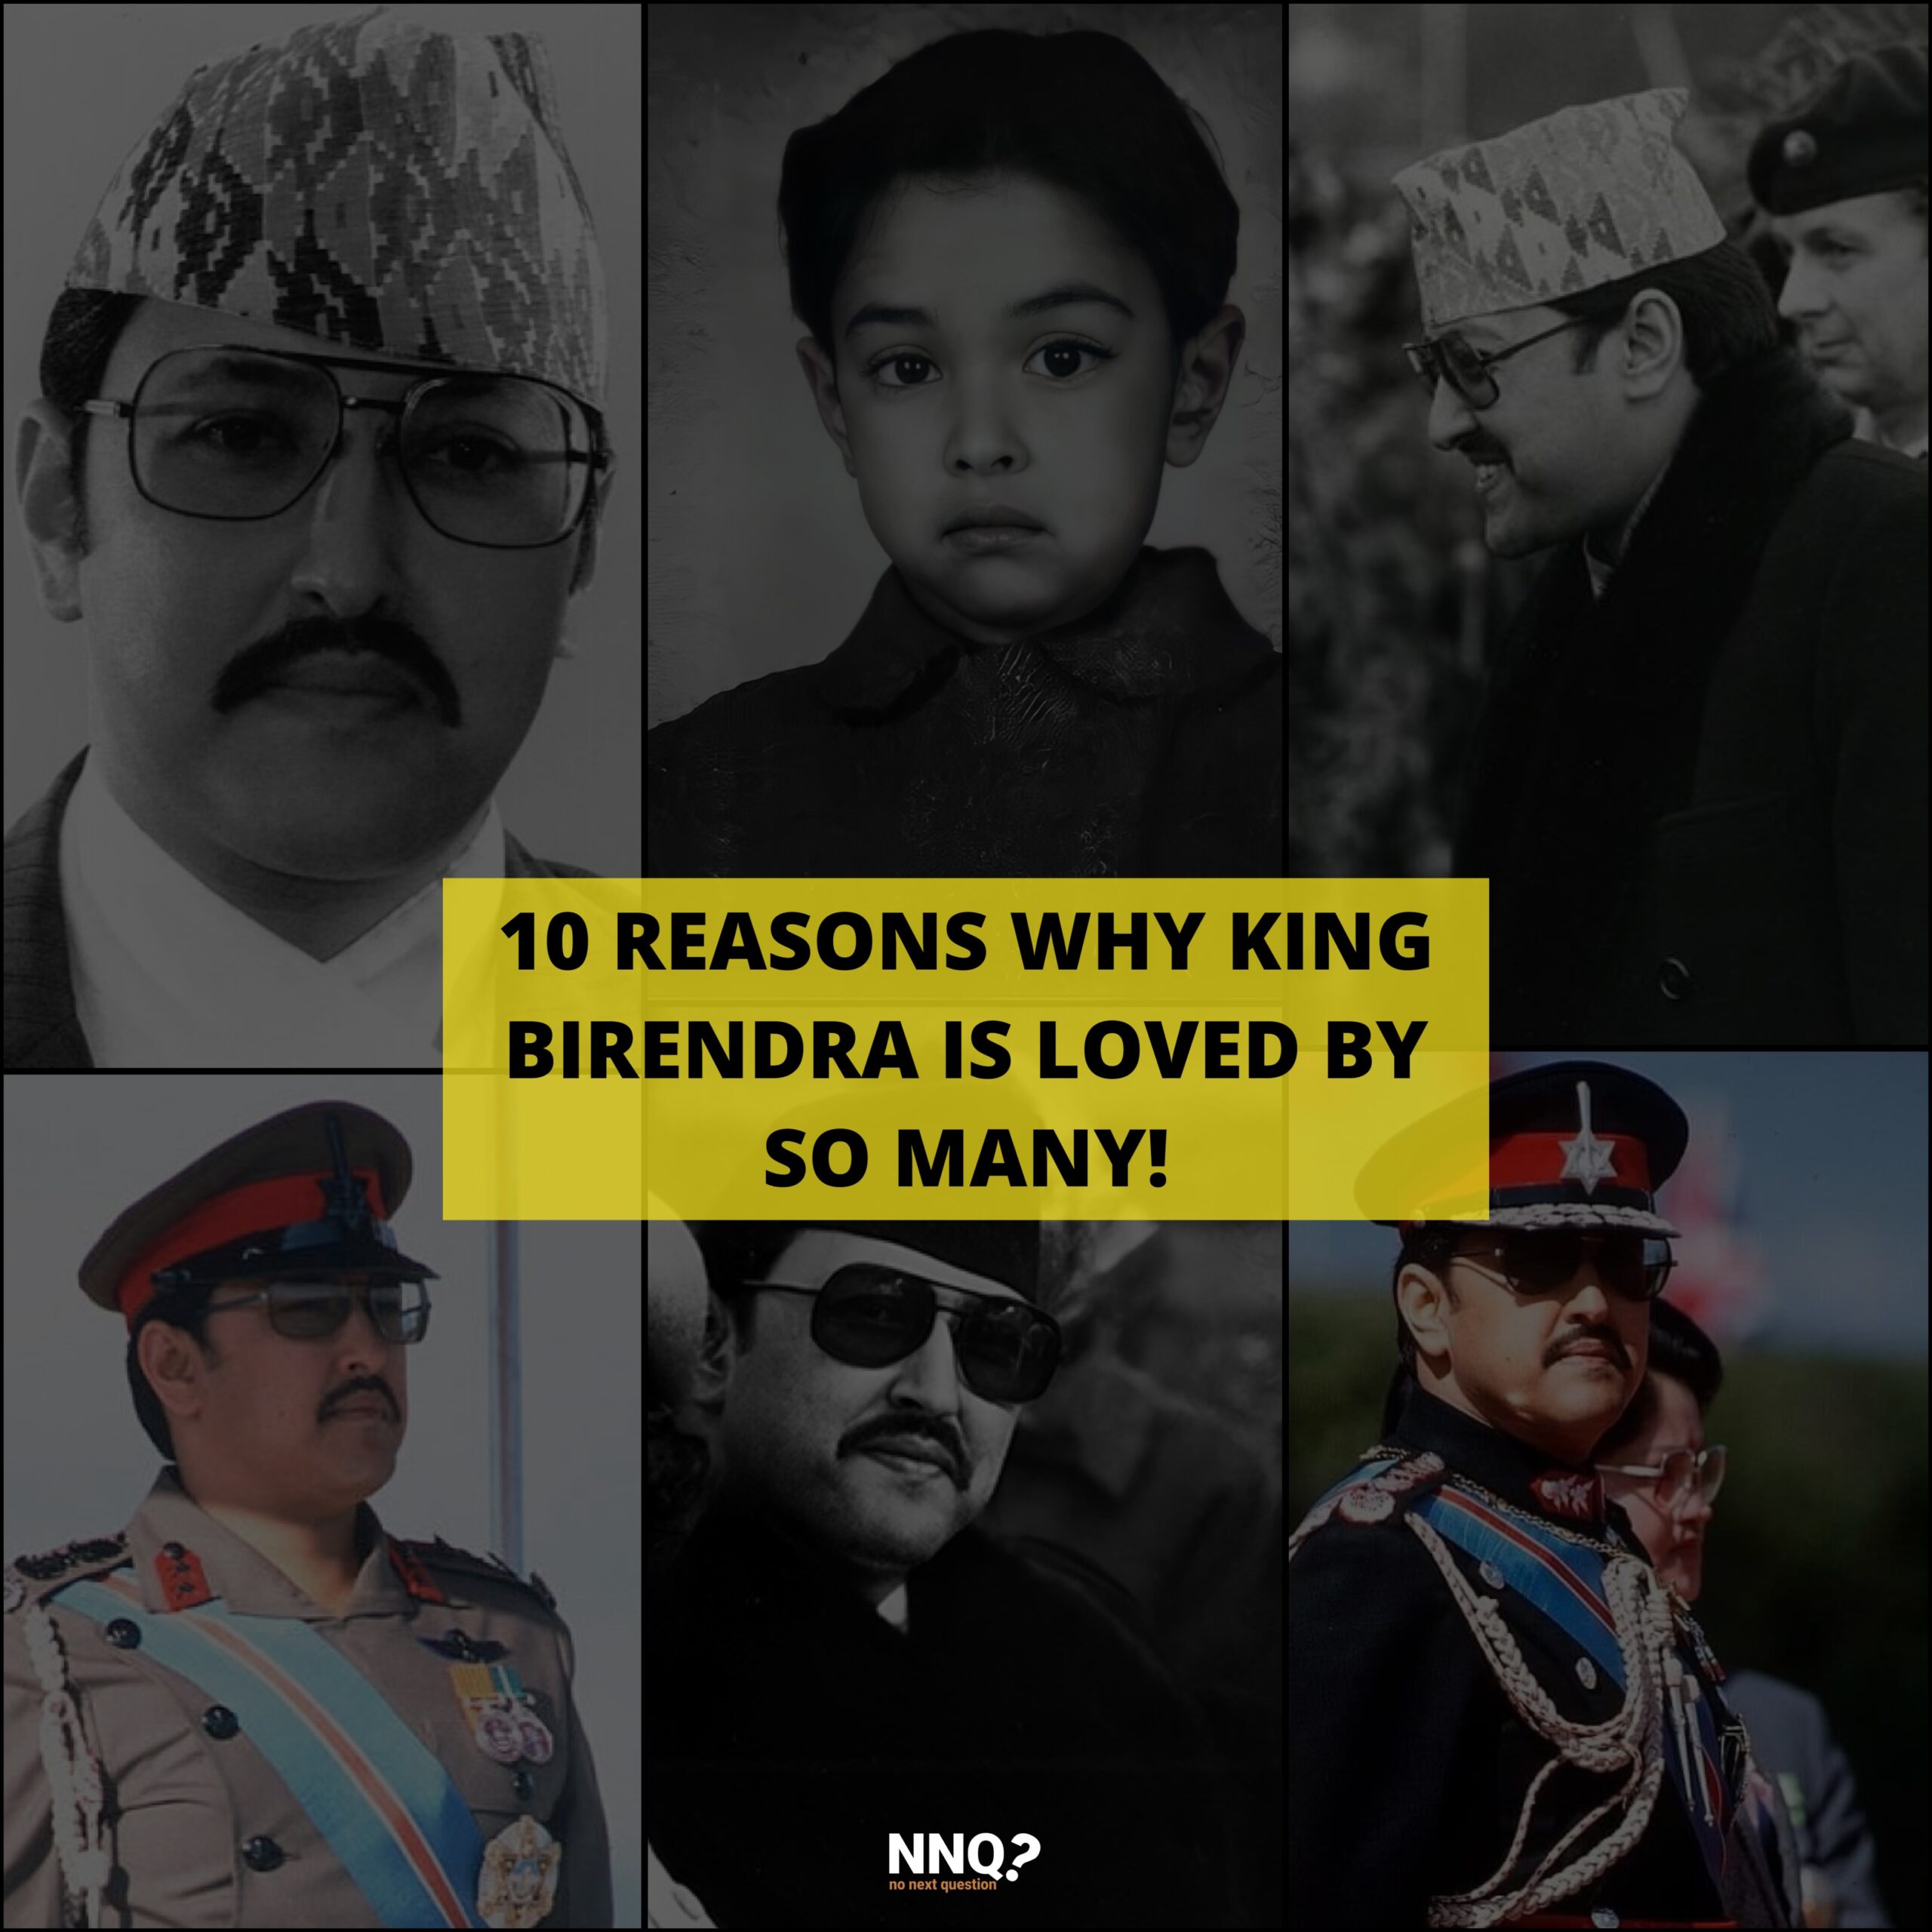 10 Reason Why King Birendra is Loved by so many